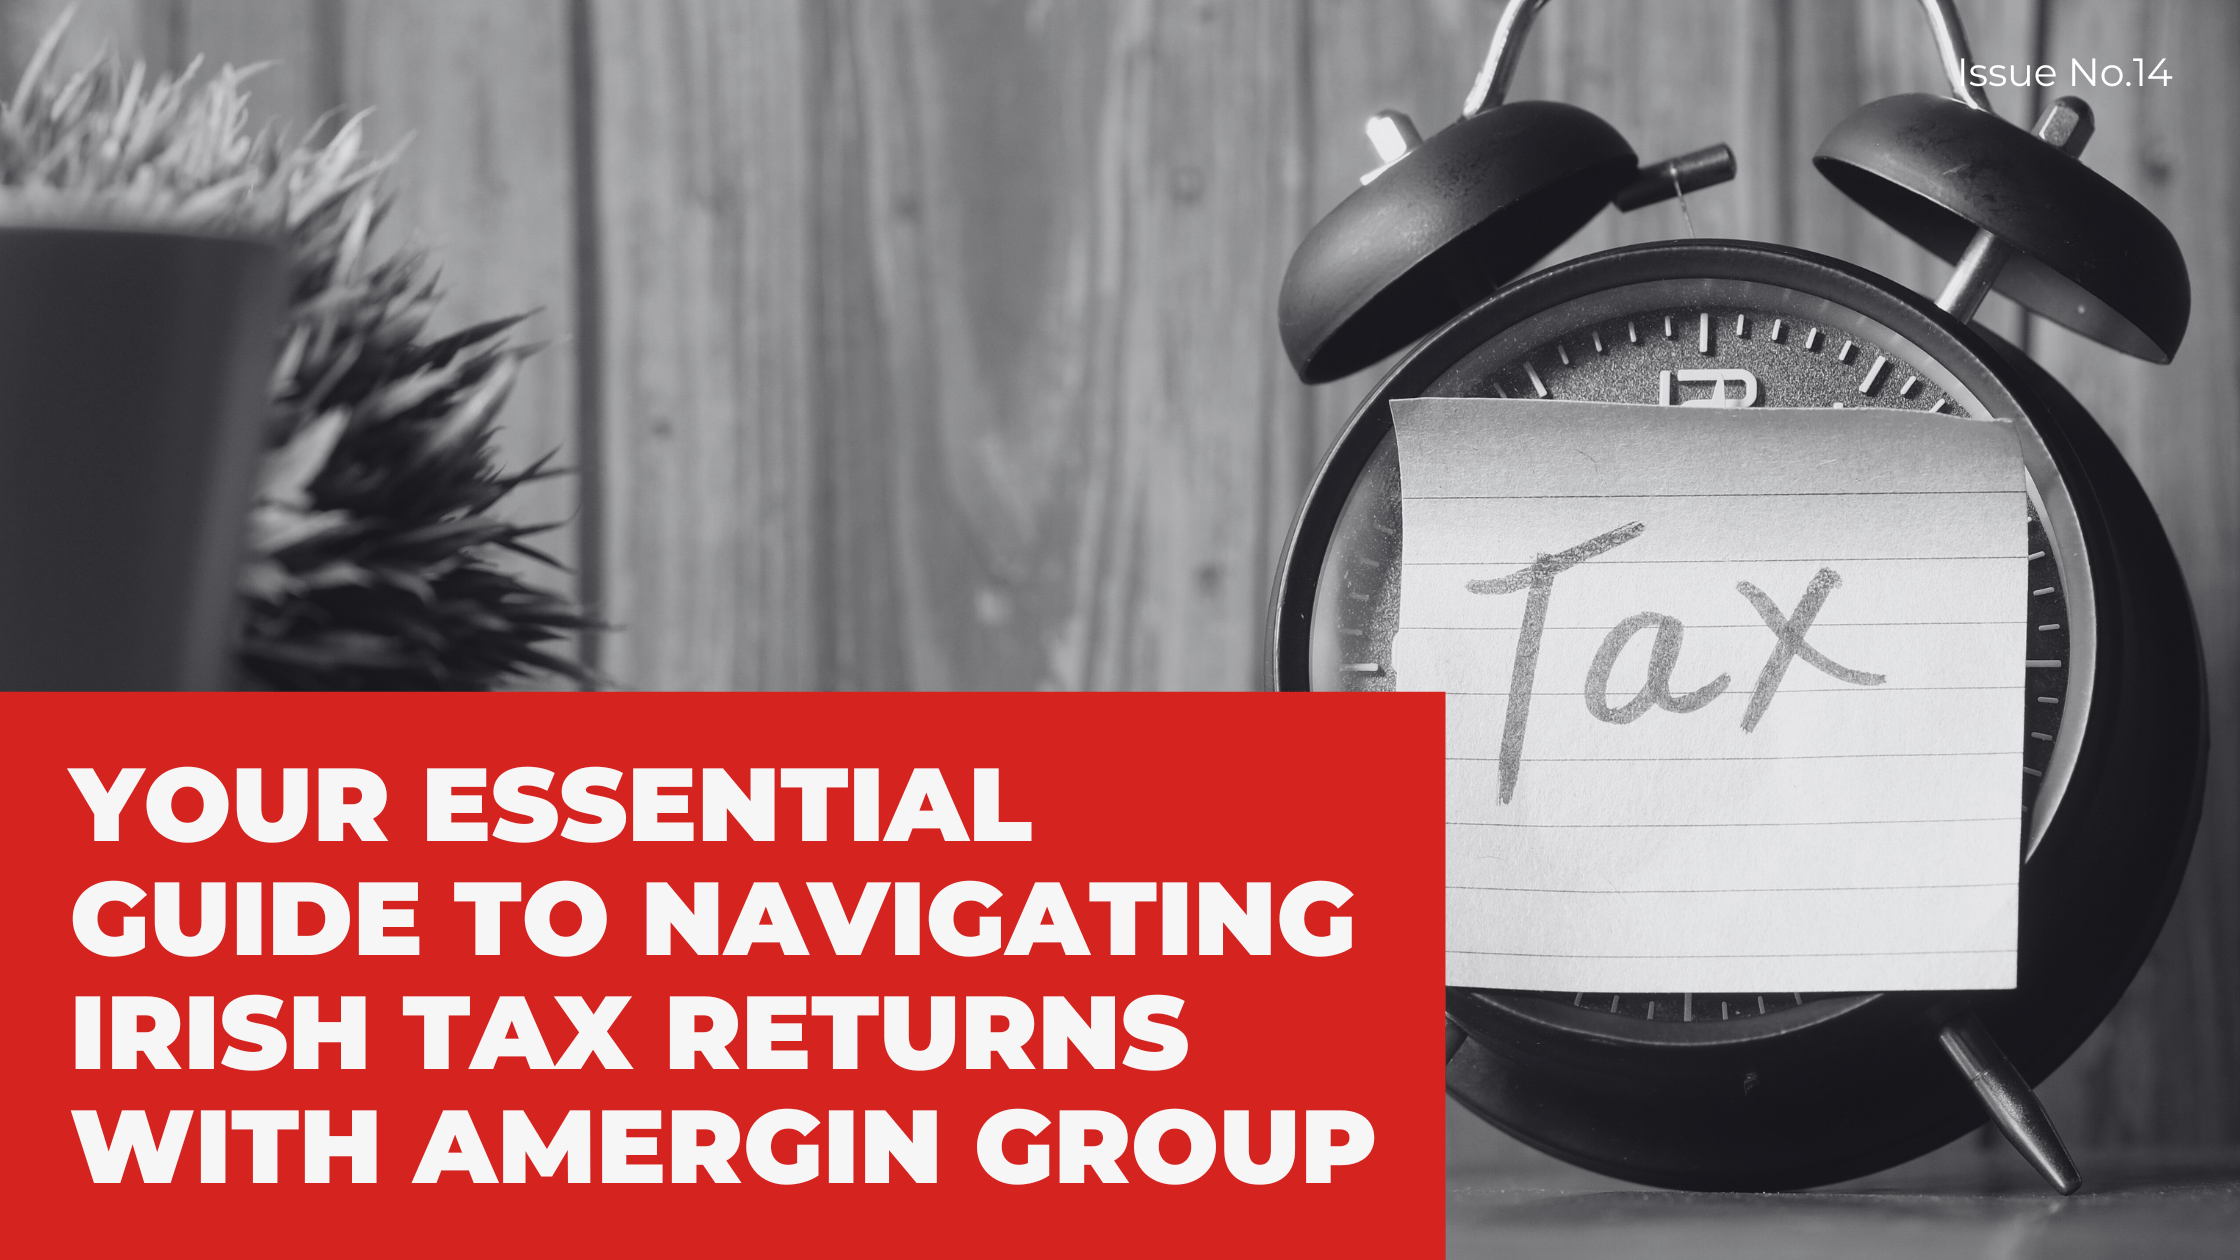 You are currently viewing YOUR ESSENTIAL GUIDE TO NAVIGATING IRISH TAX RETURNS WITH AMERGIN GROUP